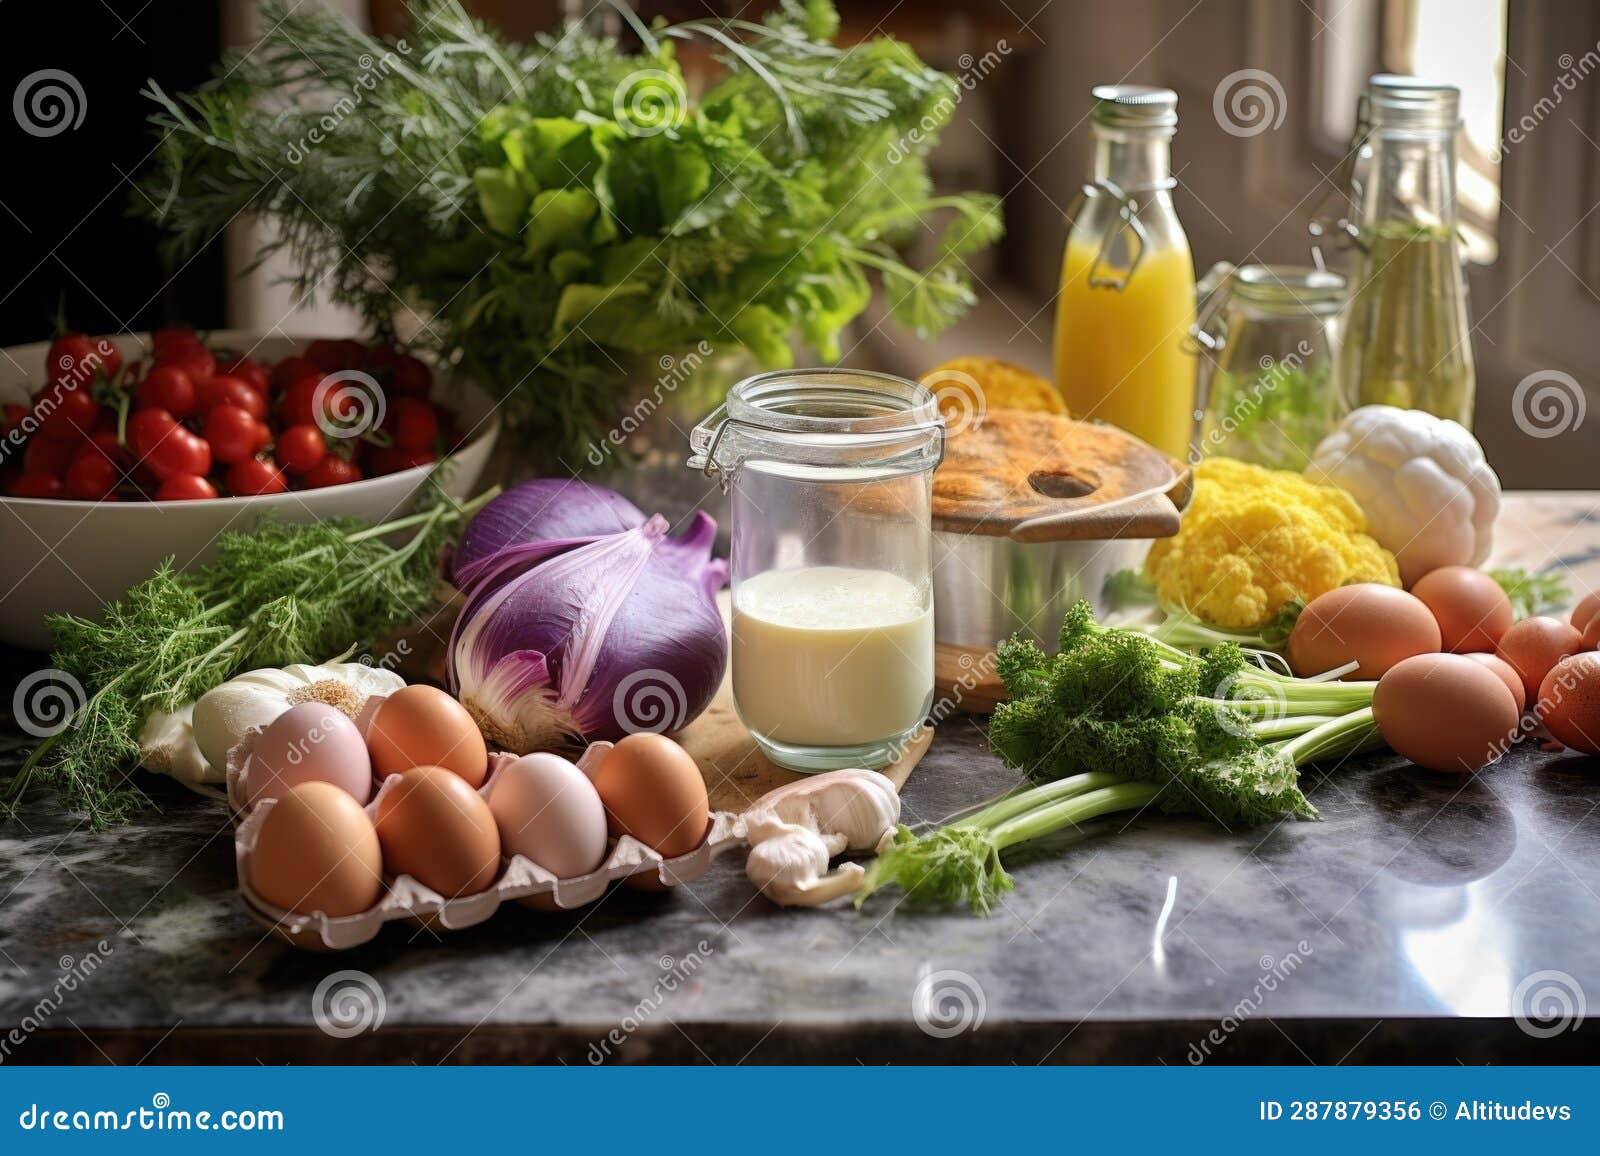 Ingredients for Quiche Laid Out on Kitchen Counter Stock Photo - Image ...